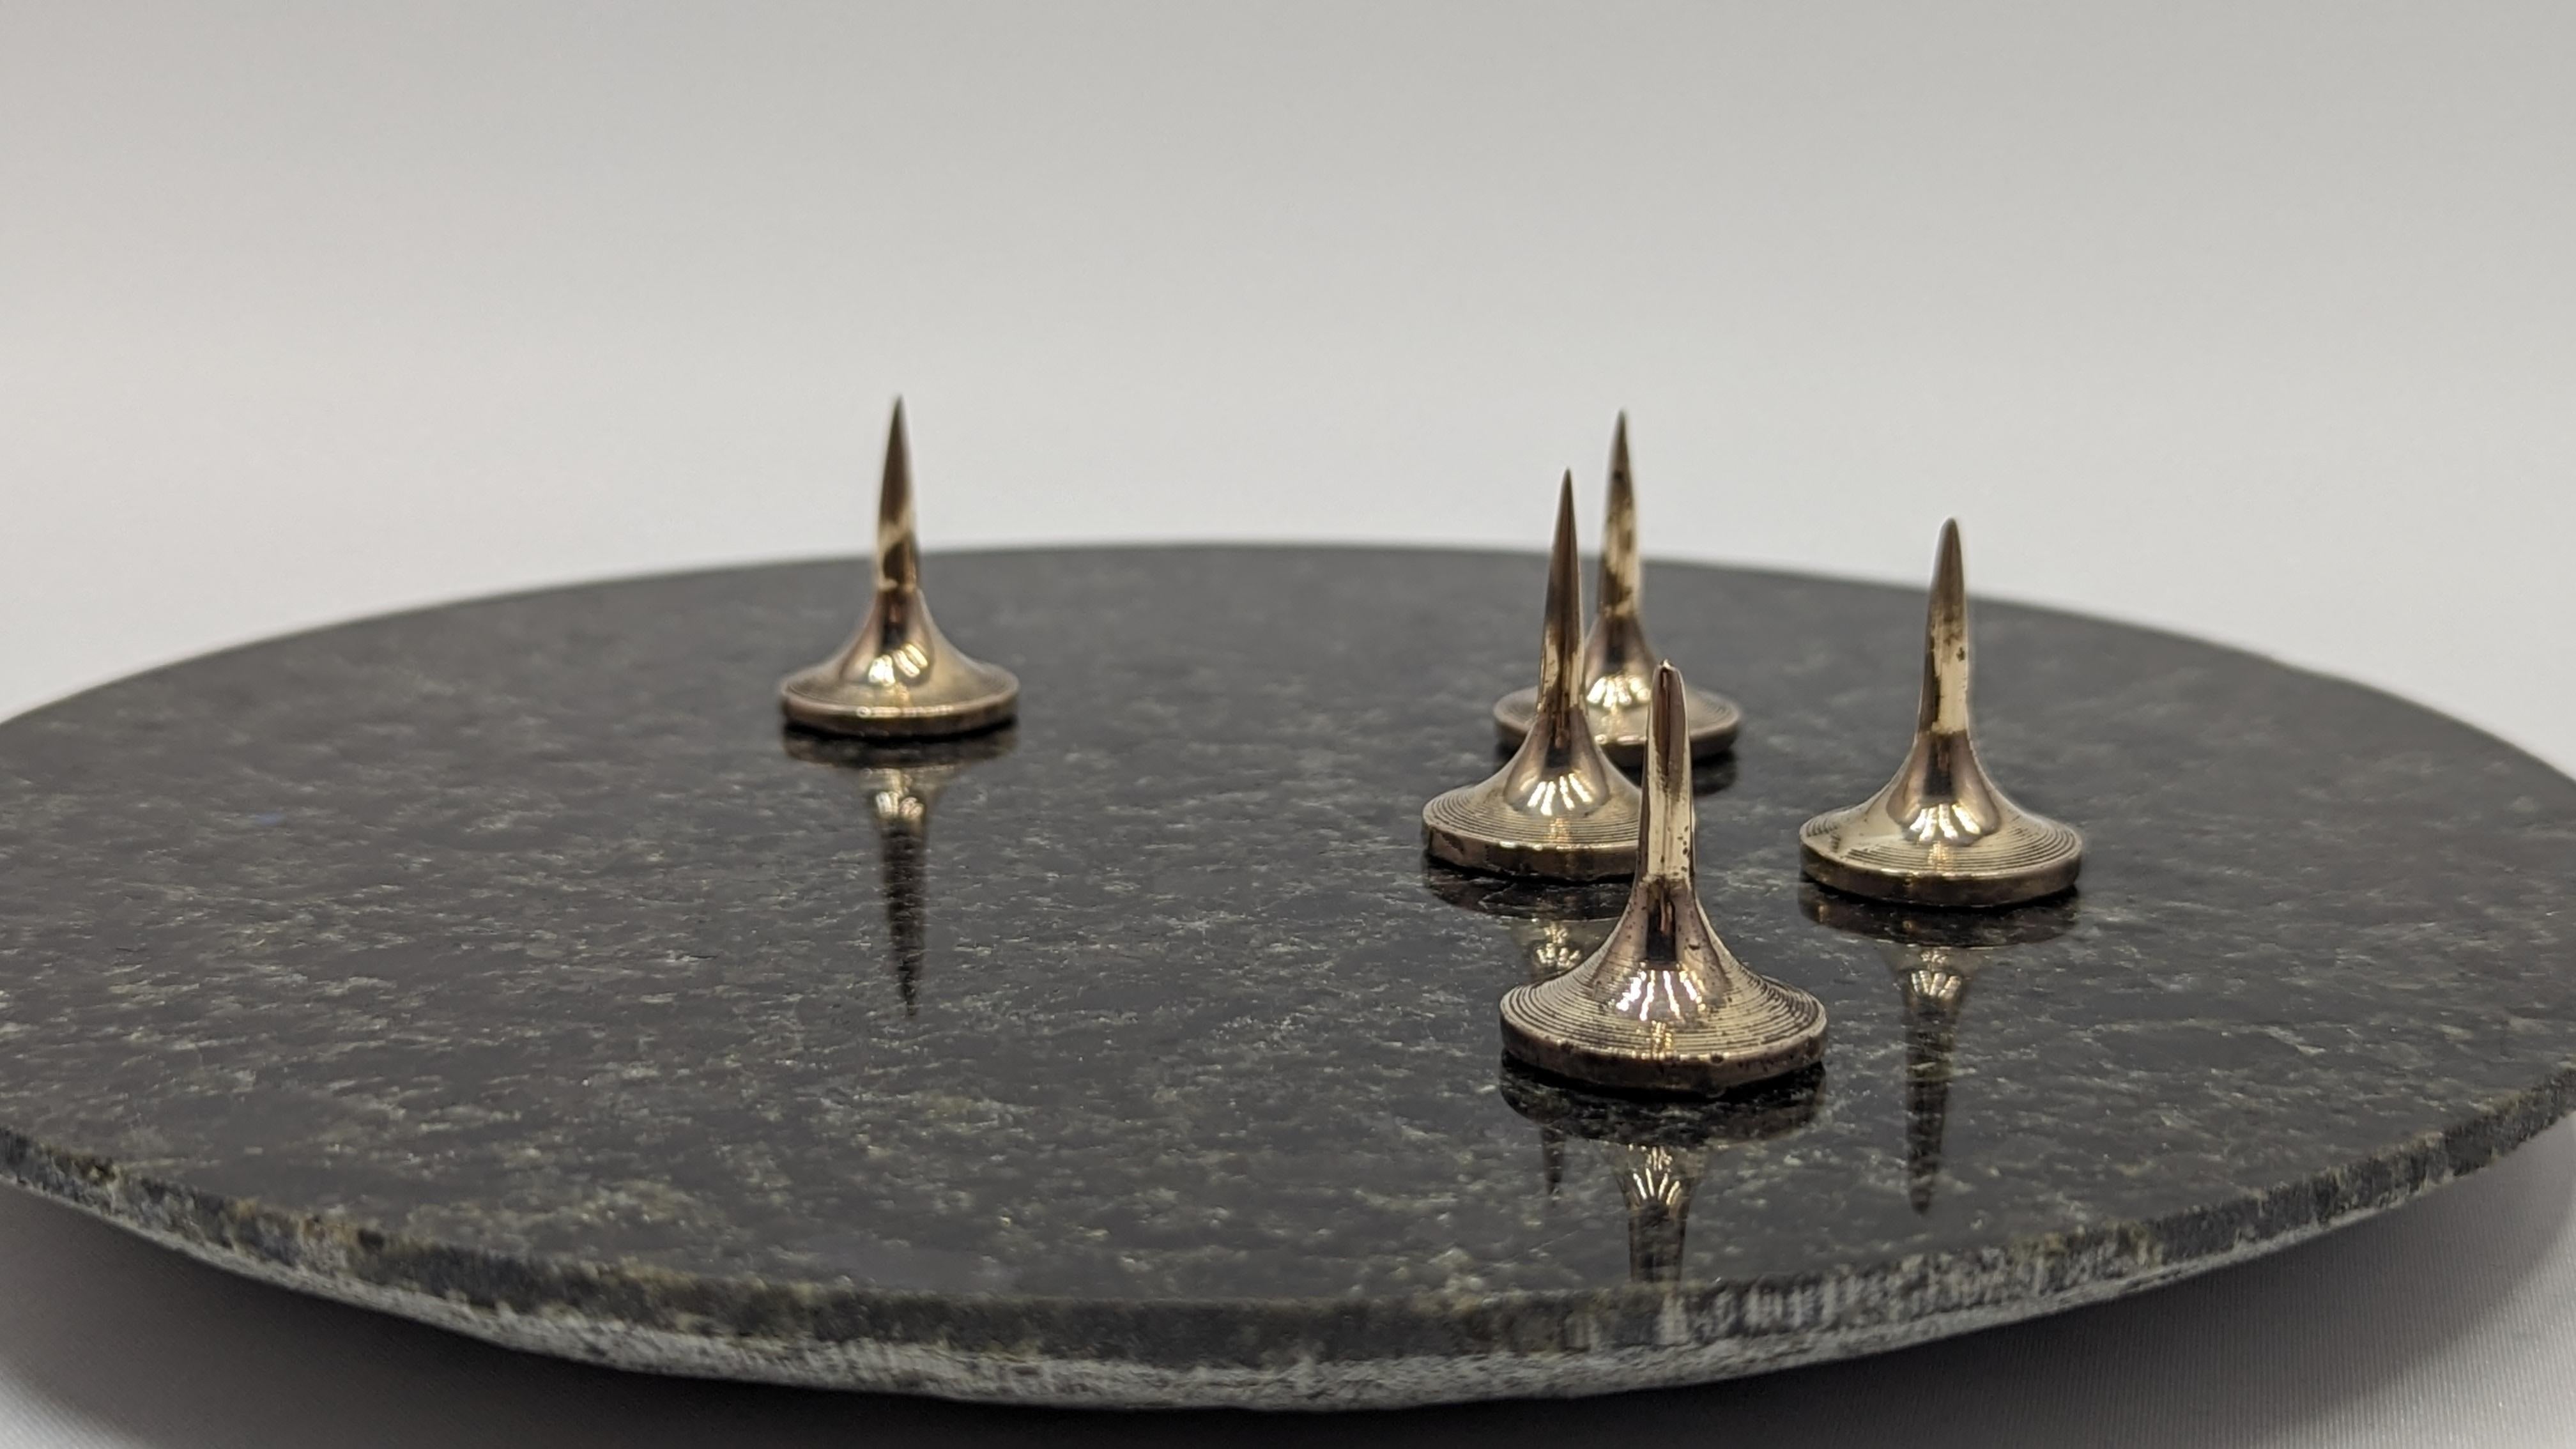 PEAKS
Candelabra with mobile bronze candle spikes. Each candle spikes can be removed such way you can variate the amont of candles (up to 5) on the granite tray.
The support is made out of a green-grey granite from Portugual. 

The bronze work